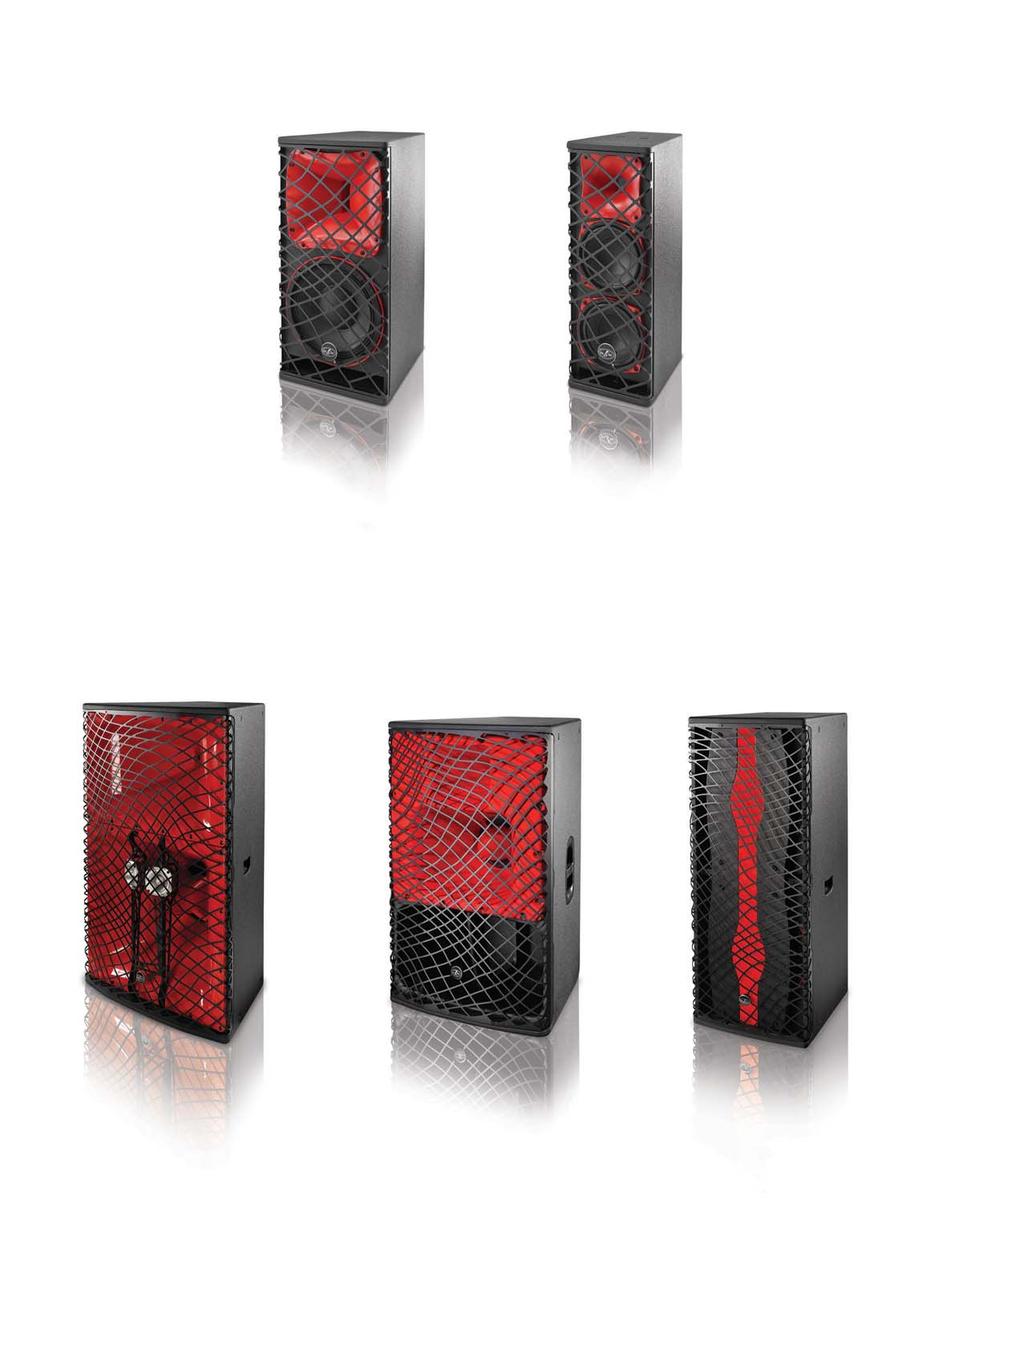 SOUND FORCE SF-10 1 x motor de compresión M-60N 1 x 10P low frequency loudspeaker 1 x M-60N compression driver Vertical or horizontal positioning SF-26 1 x motor de compresión M-34 2 x 6P low